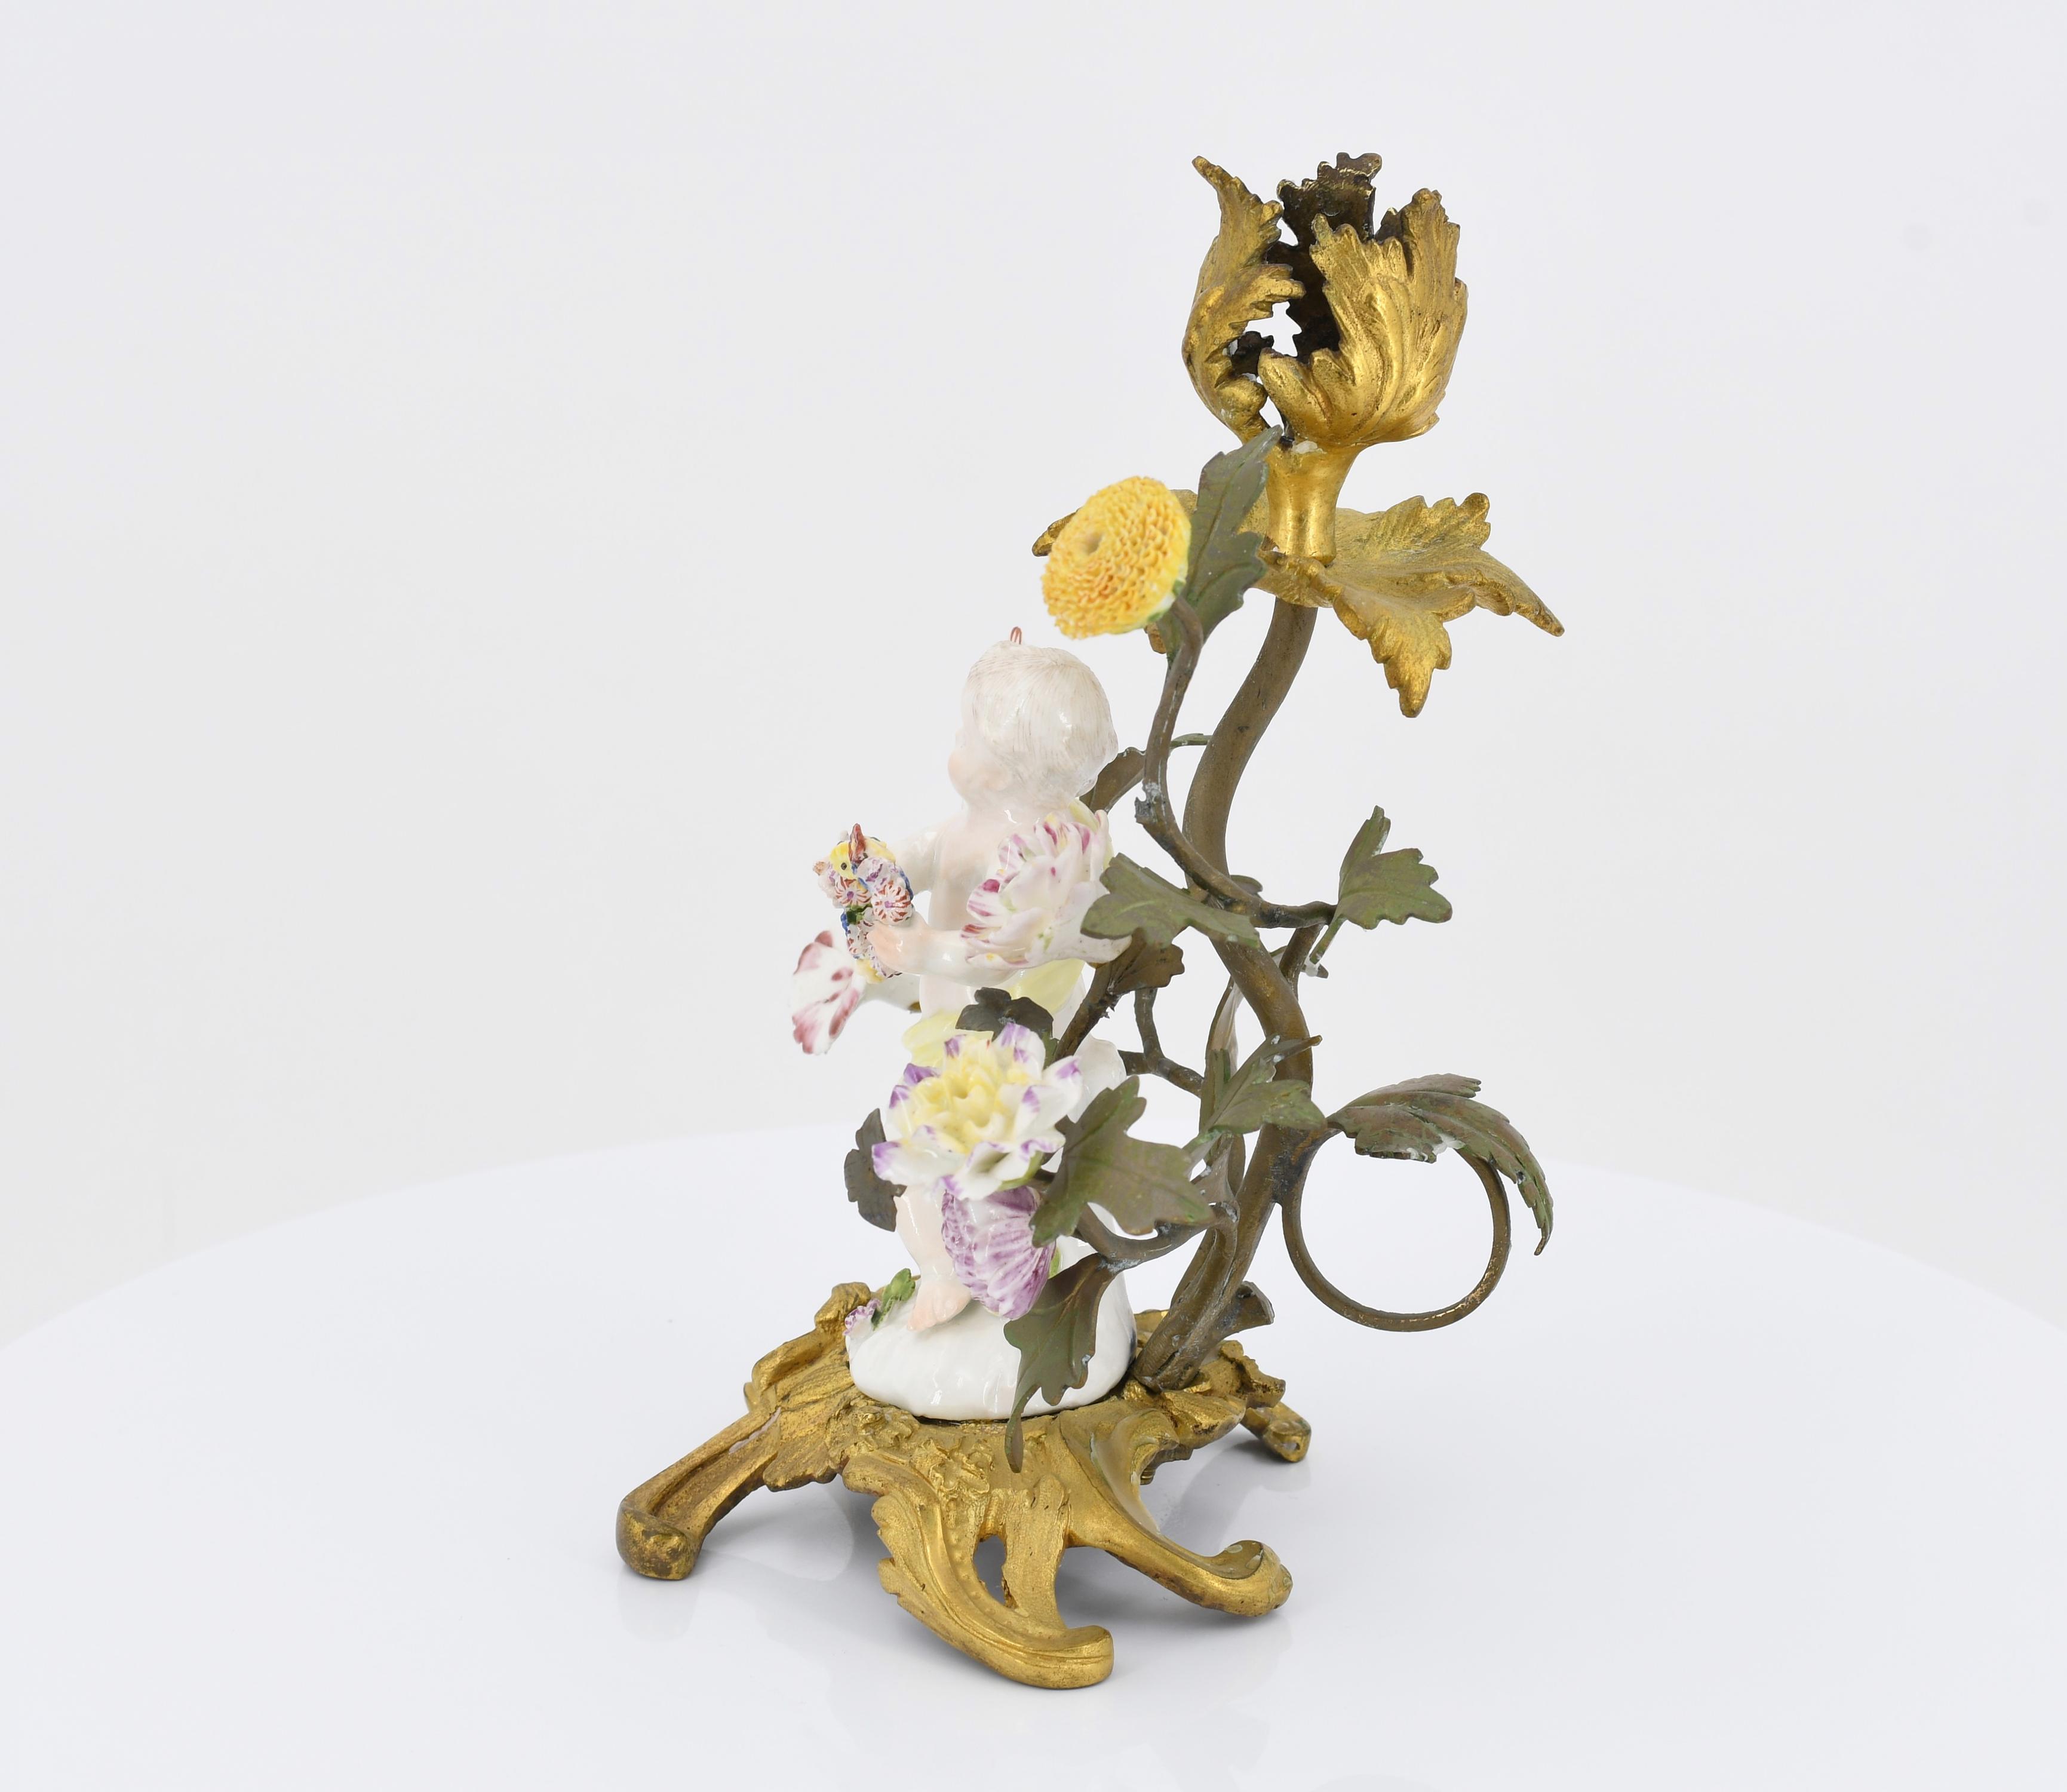 Pair of small candle holders with putti and porcelain flowers - Image 8 of 10